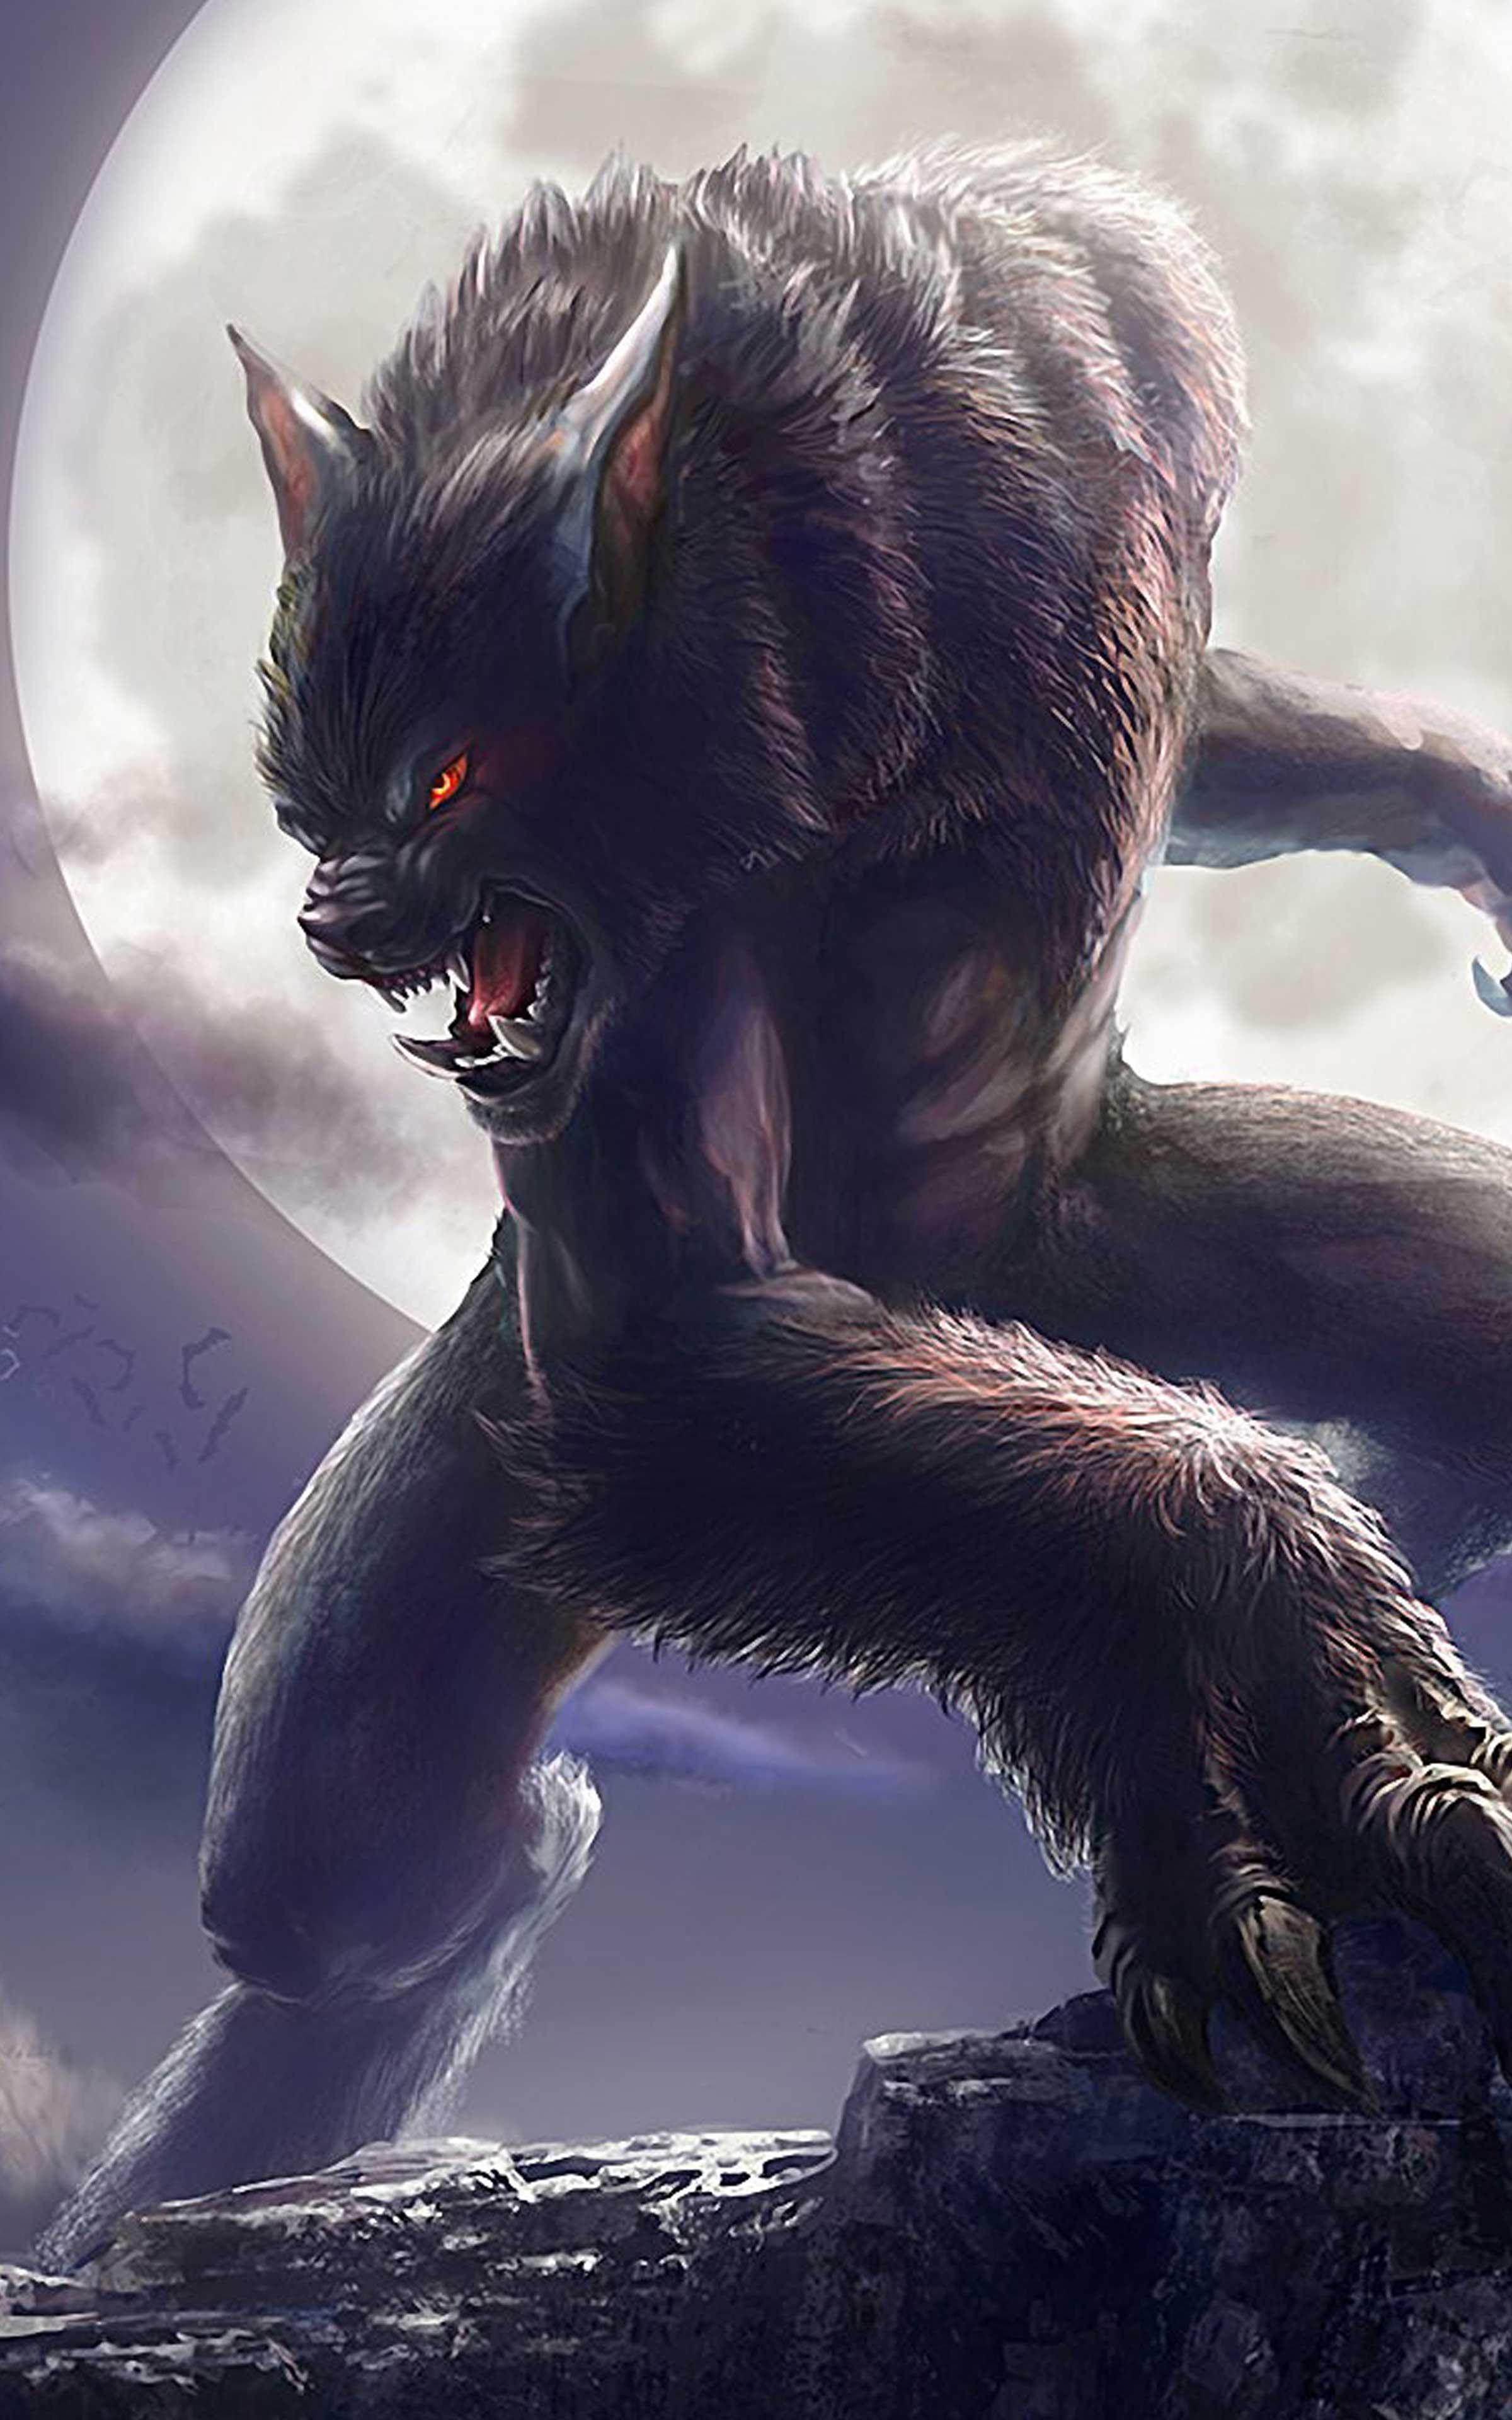 Werewolf Wallpaper Full HD Wallpaper for Android